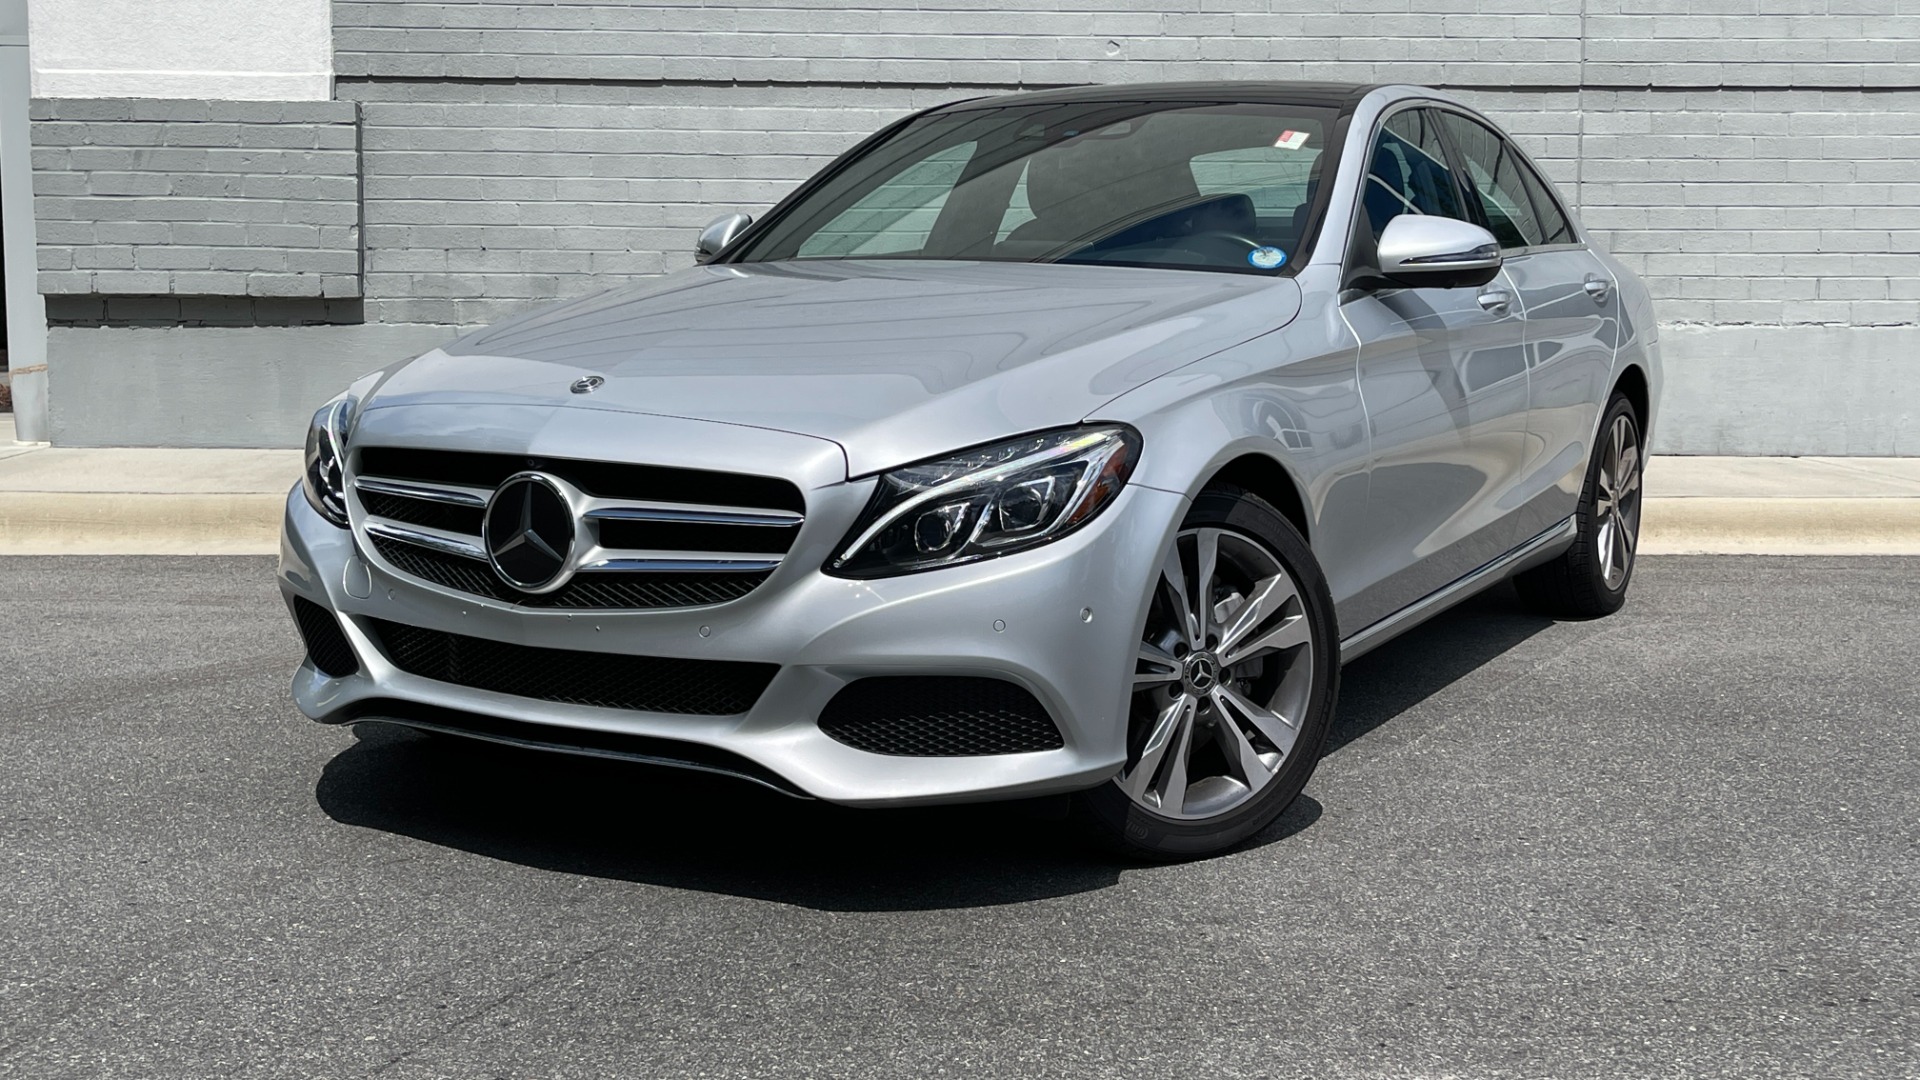 Used 2018 Mercedes-Benz C-Class C300 / PANORAMIC / HEADS UP DISPLAY / ADVANCED LIGHTING / PREMIUM ASSISTANC for sale $30,995 at Formula Imports in Charlotte NC 28227 7